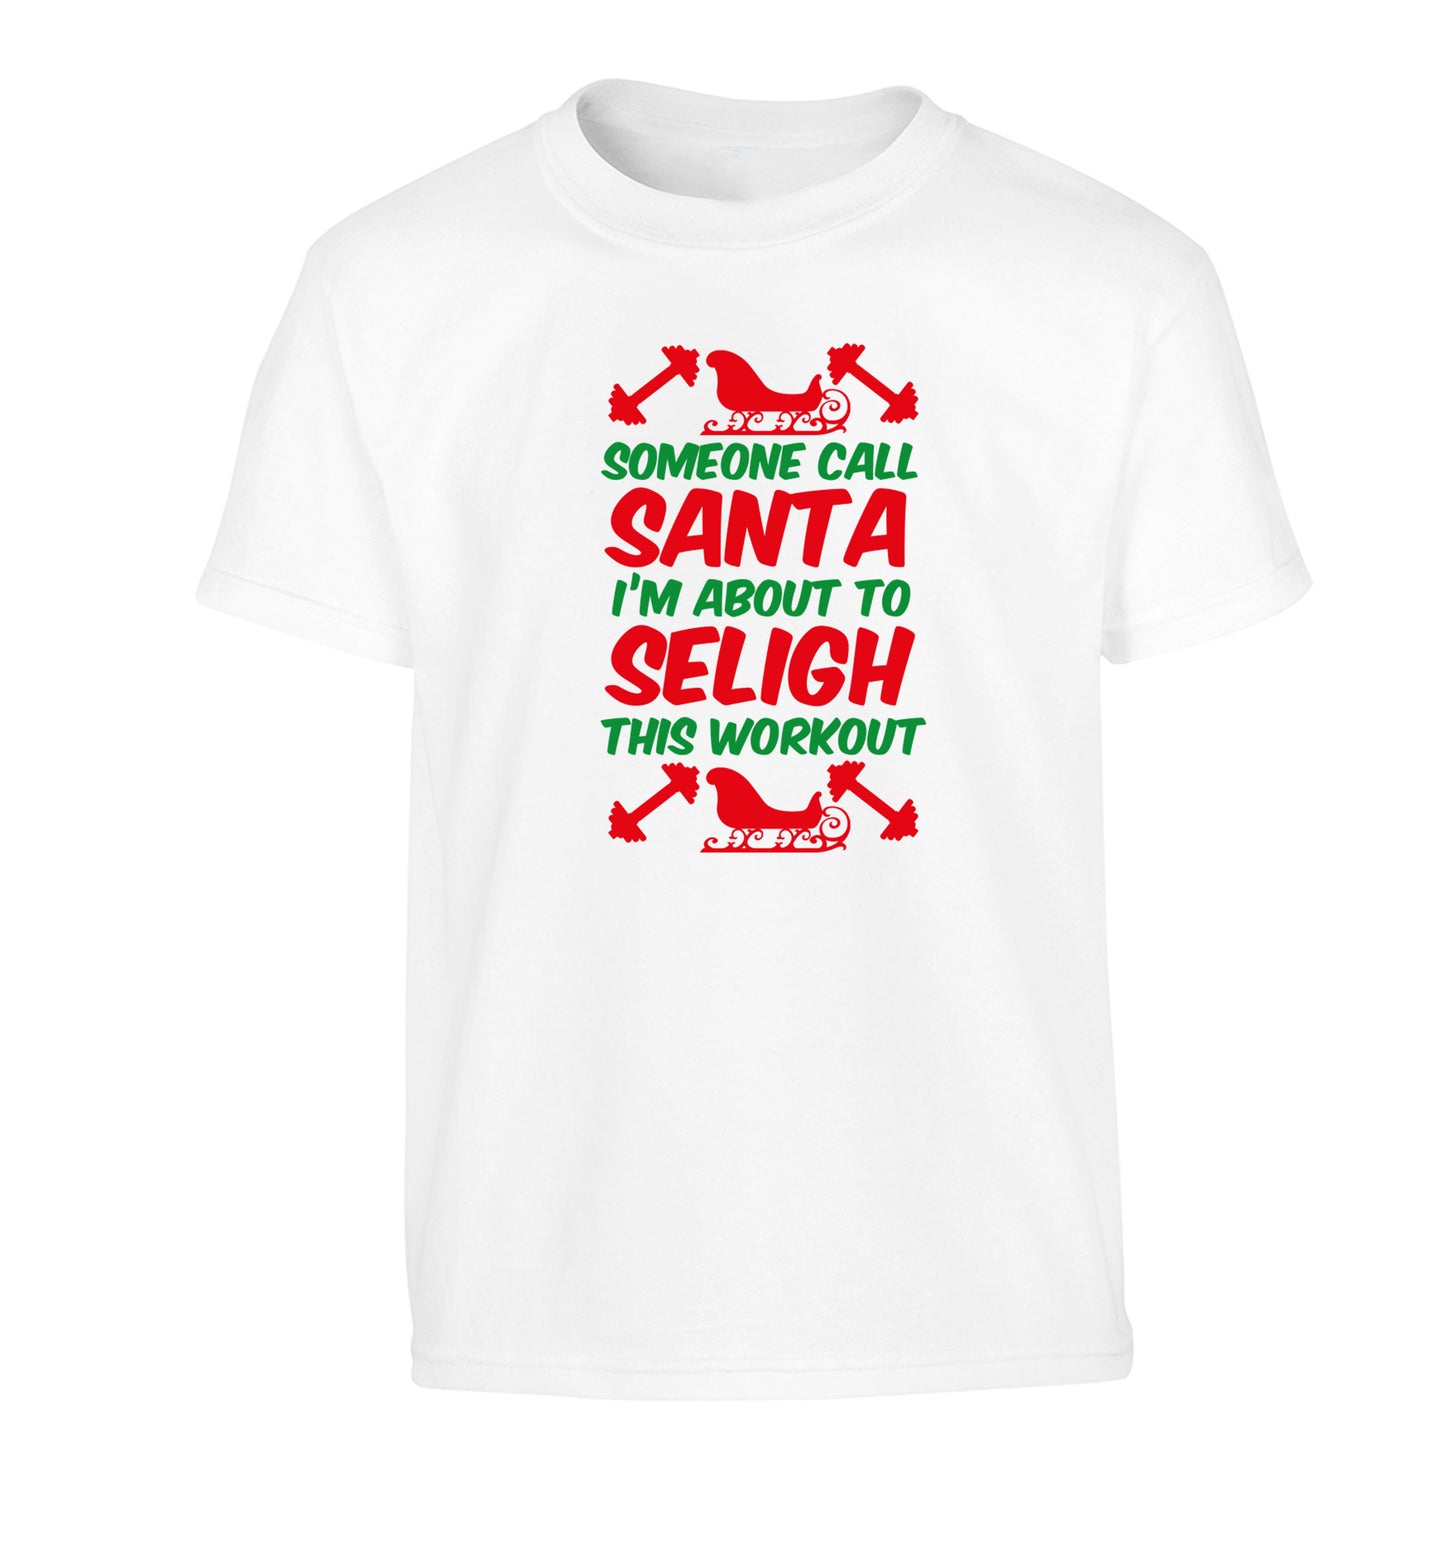 Someone call santa, I'm about to sleigh this workout Children's white Tshirt 12-14 Years